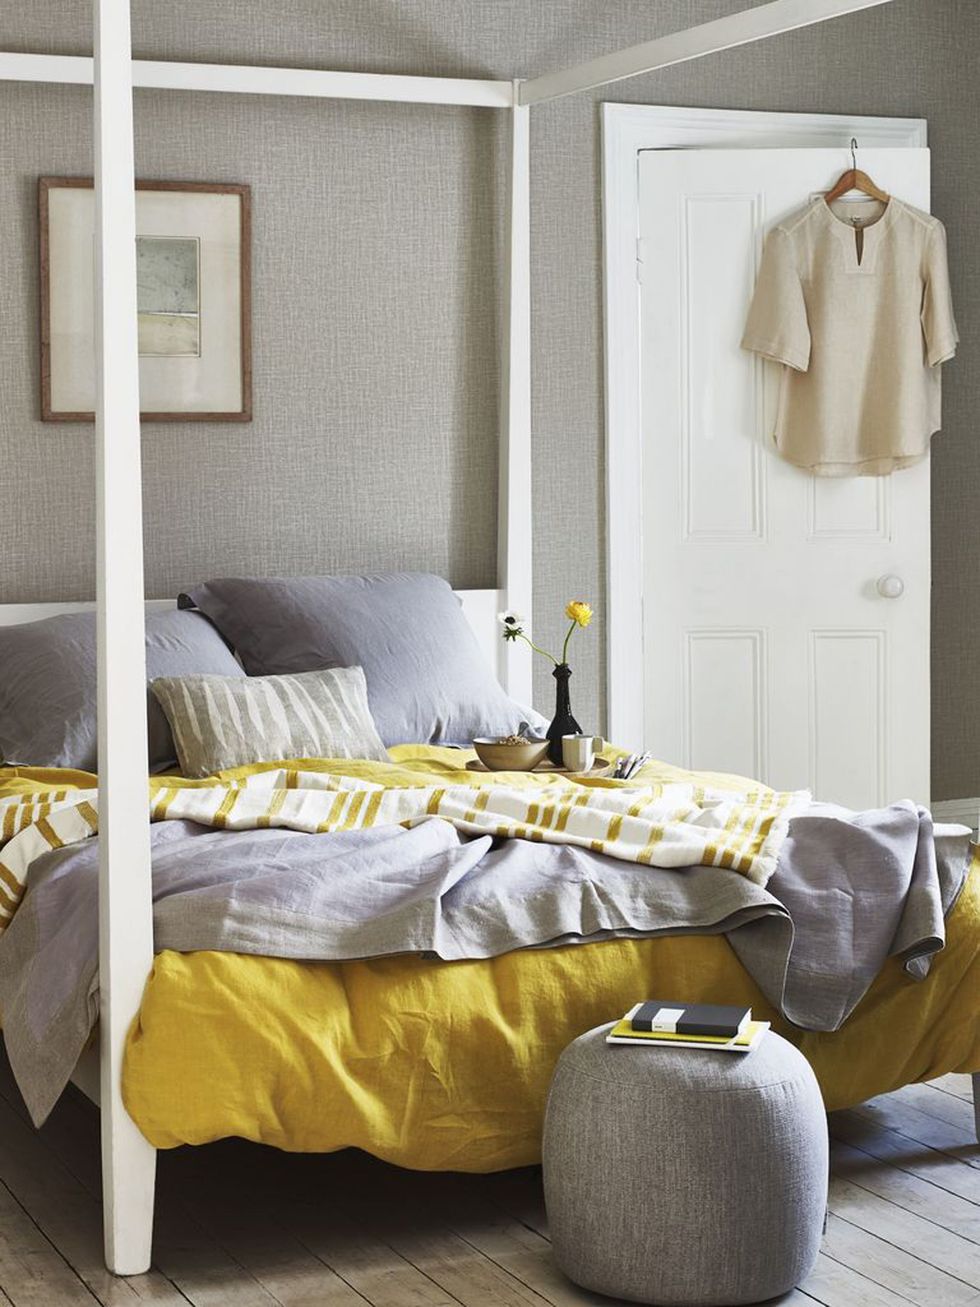 feng shui bedroom, bedroom with white modern four poster bed, grey and mustard yellow bed linen